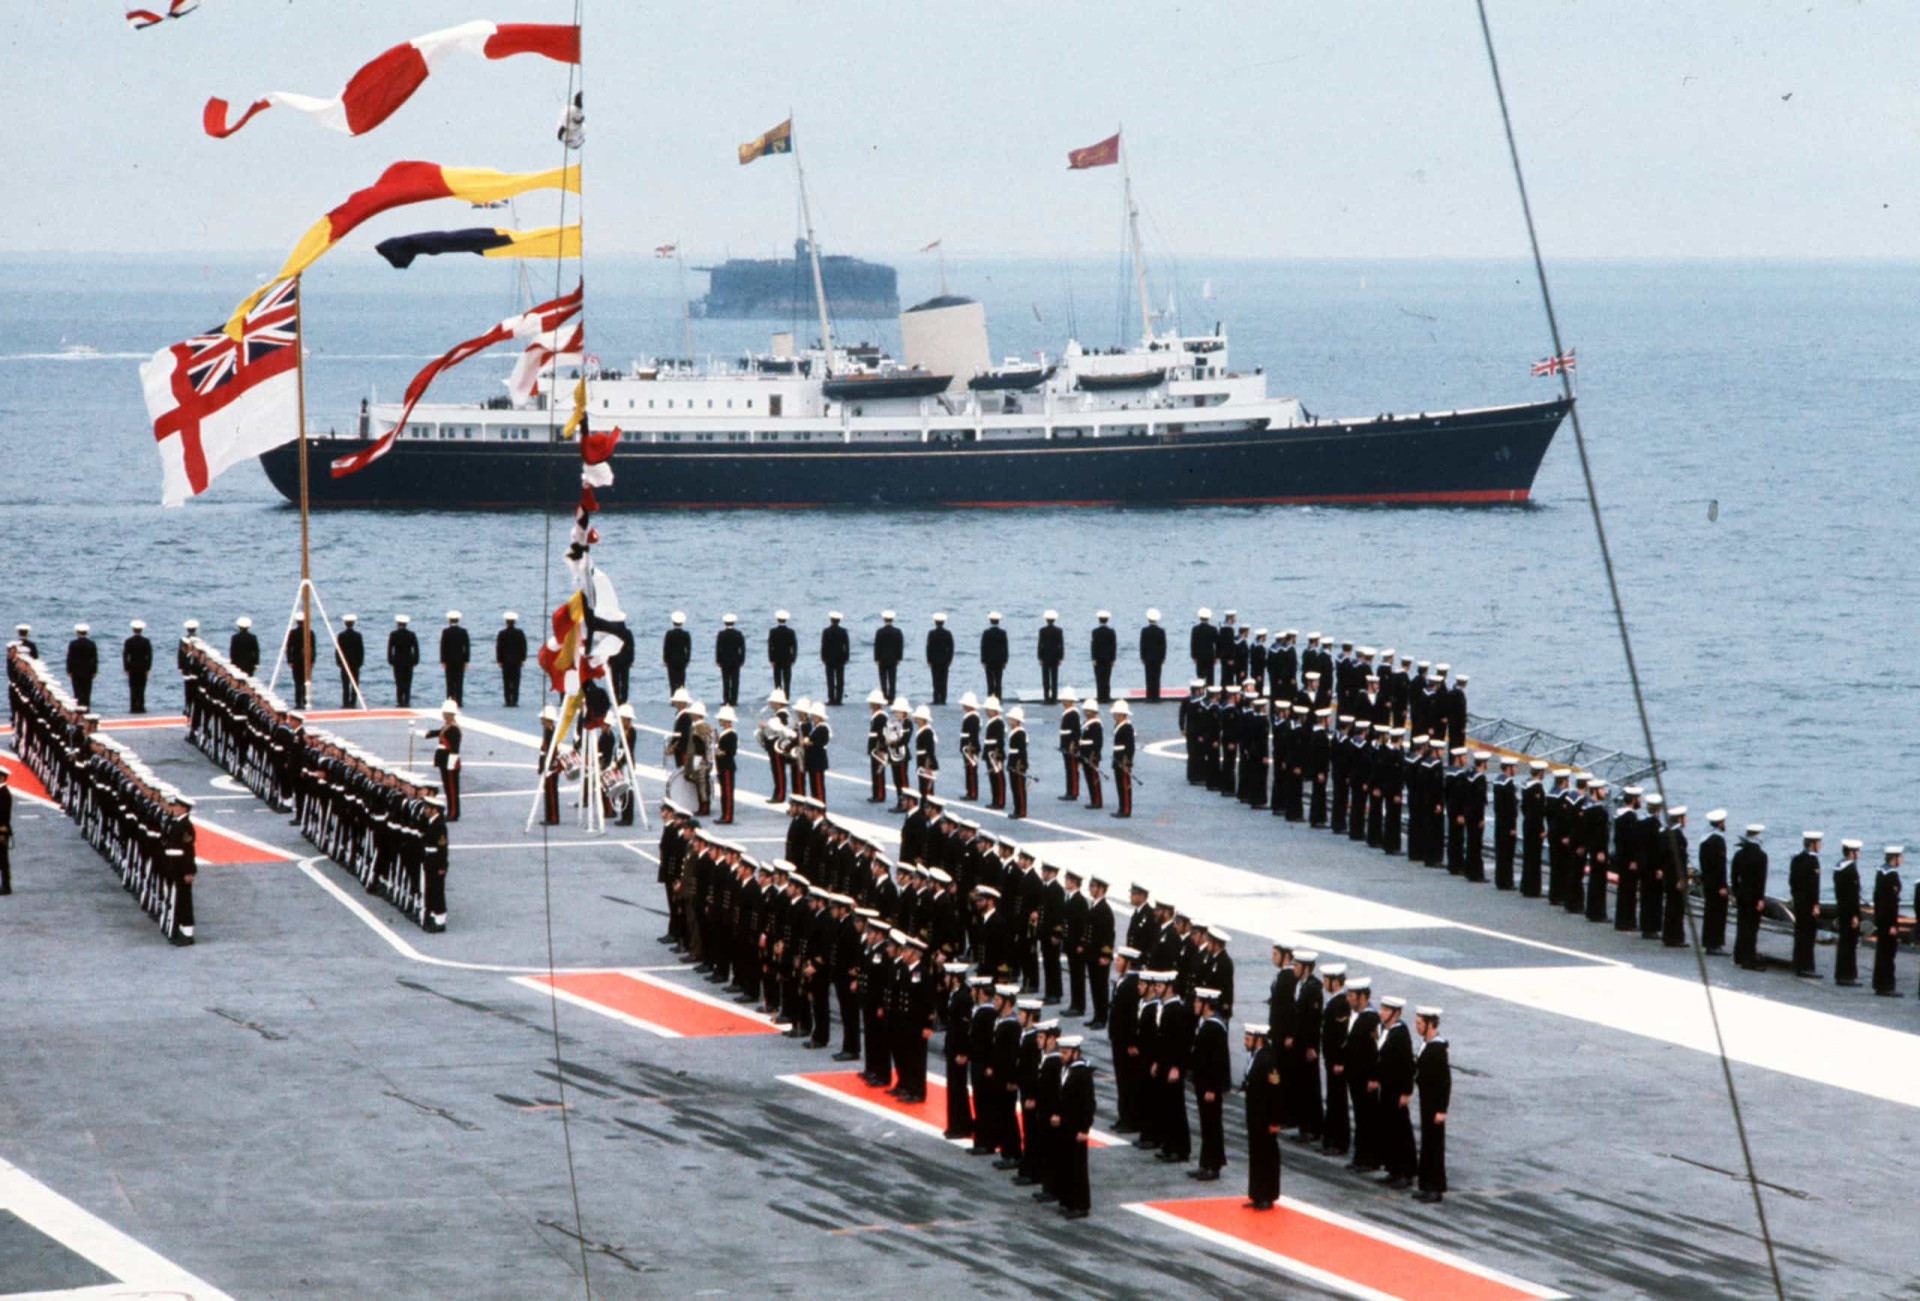 <p>The Silver Jubilee of Queen Elizabeth II in 1977 marked the 25th anniversary of the monarch's accession to the British throne. Among the series of year-long events was the Silver Jubilee Review of the Fleet at Spithead, off Portsmouth in southern England. <em>Britannia</em> sailed past dozens of Royal Navy vessels anchored in the Solent on June 28, 1977.</p><p>You may also like:<a href="https://www.starsinsider.com/n/349594?utm_source=msn.com&utm_medium=display&utm_campaign=referral_description&utm_content=474709v3en-ph"> Celebrity siblings that fame forgot</a></p>